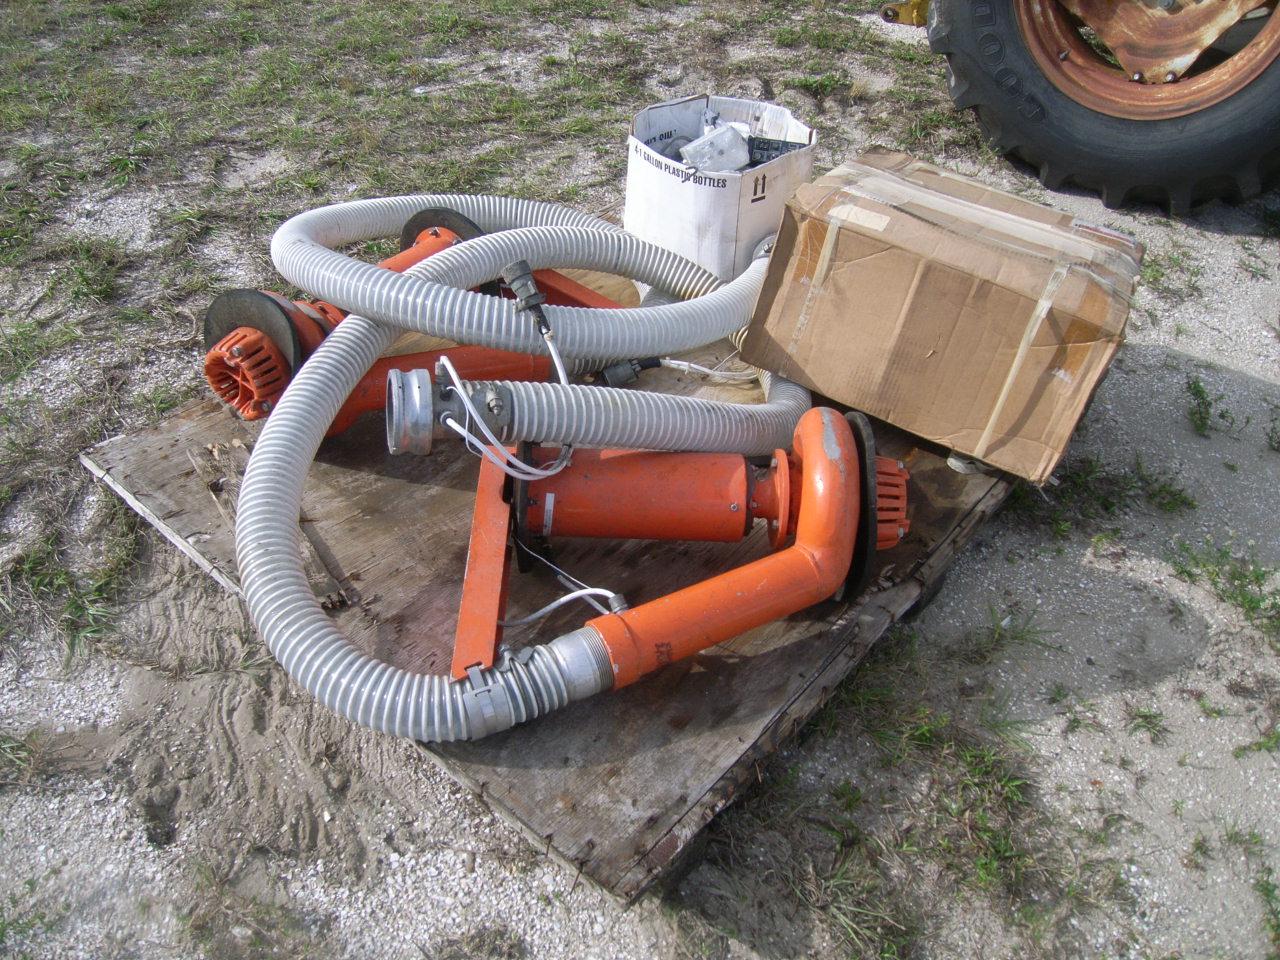 1-01142 (Equip.-Sprayer)  Seller:Sarasota County Commissioners SIMPLEX FIRE ATTACK SPRAY SYSTEM WITH